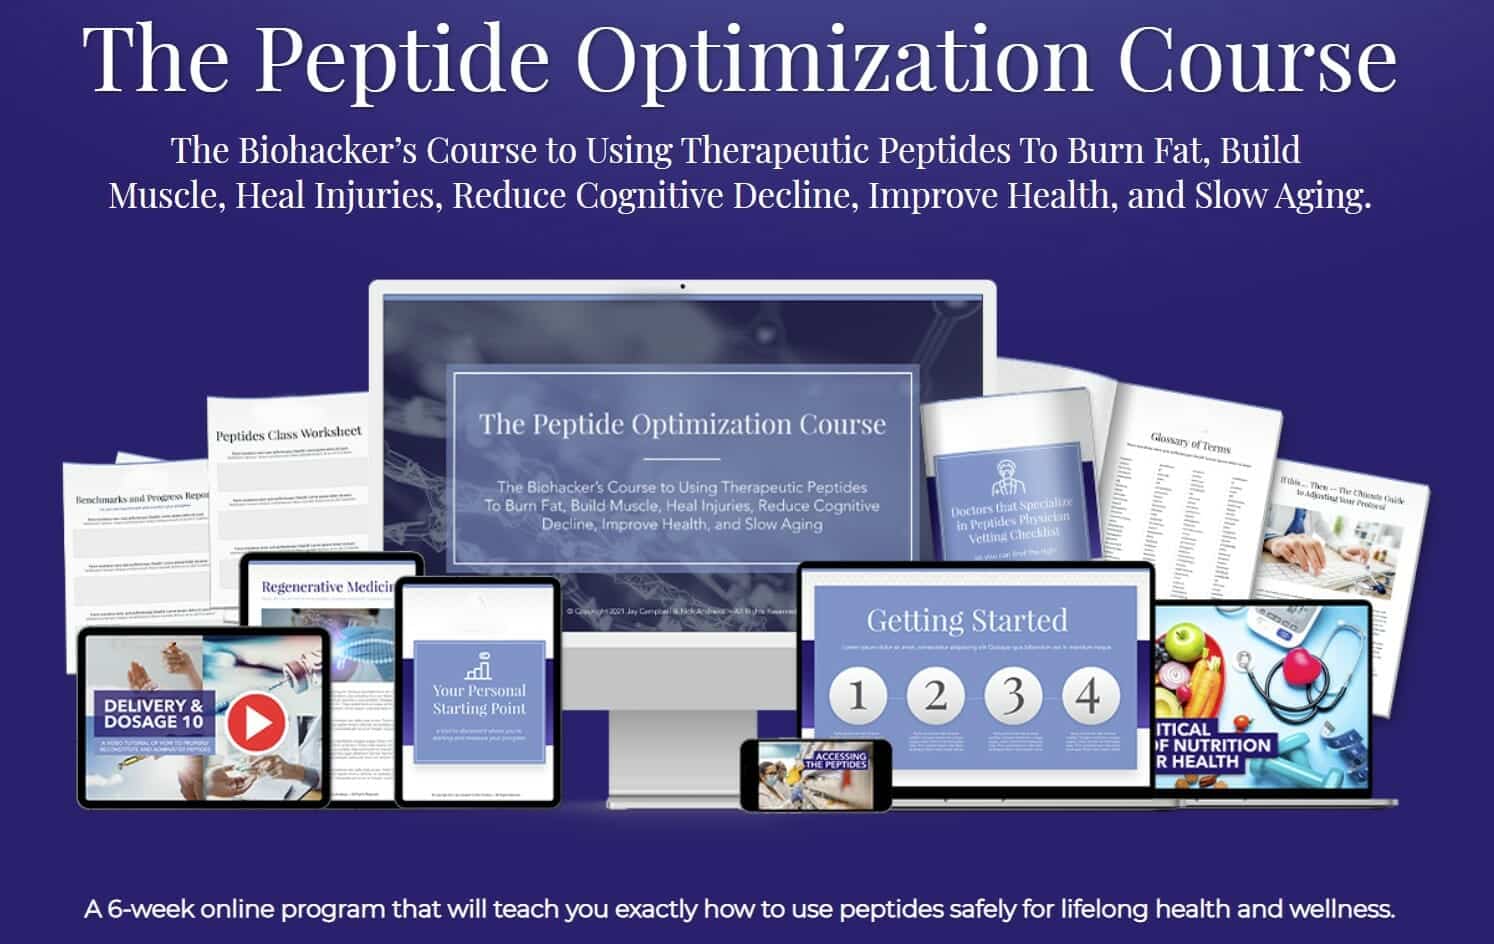 The Peptide Optimization Course: How To Fully Maximize Your Health